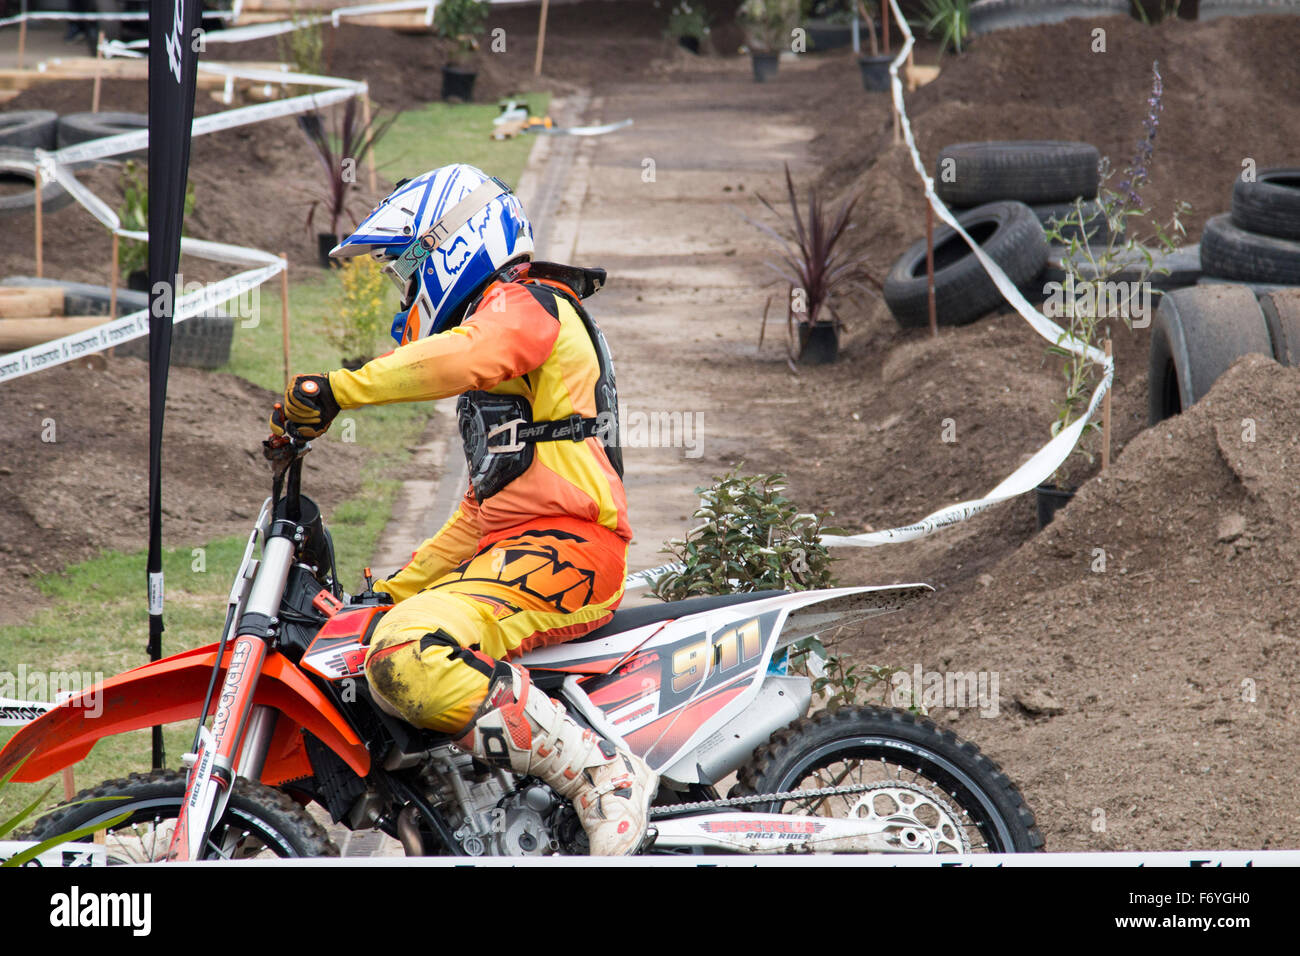 Sydney, Australia. 22nd November, 2015. Sydney Motorcycle Show from Sydney Olympic Park,exhibition motorcycle riding over motocross off road terrain on motocross trail bike Stock Photo